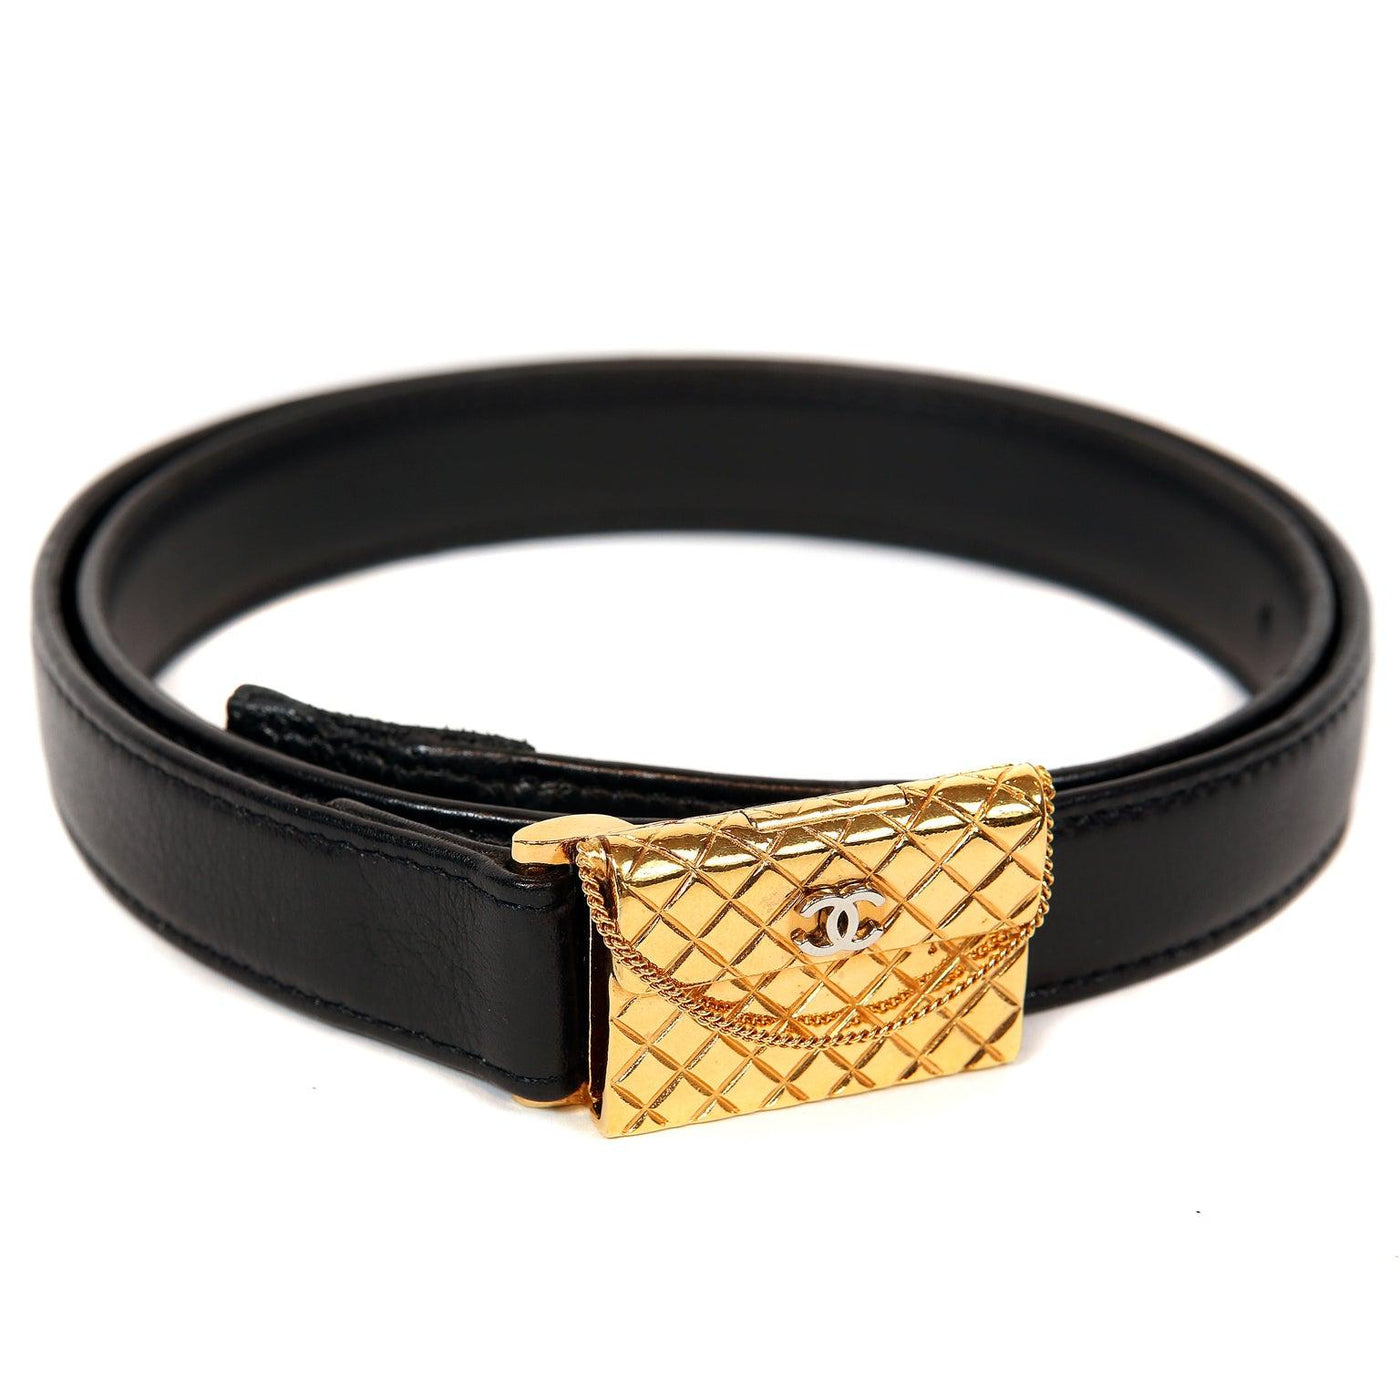 Chanel Black Leather Quilted Handbag Buckle Belt - Only Authentics